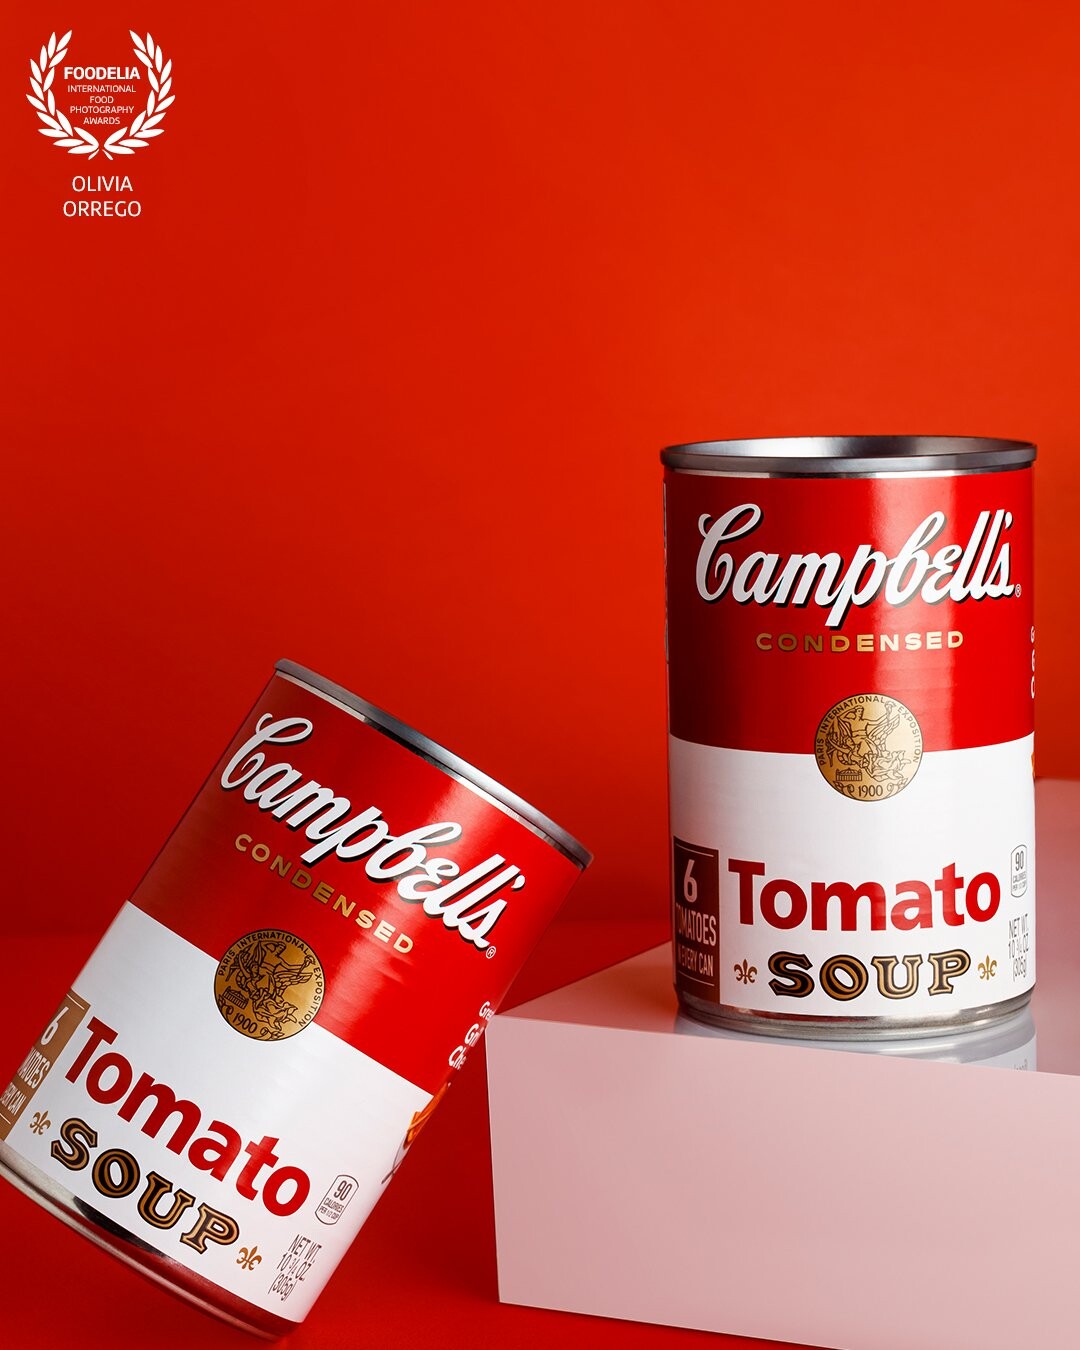 Shooting the iconic Campbell's tomato soup can was a lovely challenge, given its aesthetic, trajectory and recognition for over 150 years of history. Everything was very well planned, from the creation of the bi tonal set using red and white to highlight the product, and reflect the essence of the brand in the capture, as well as giving it a feel of elegance, warmth and love, while still keeping a clean and sober space.